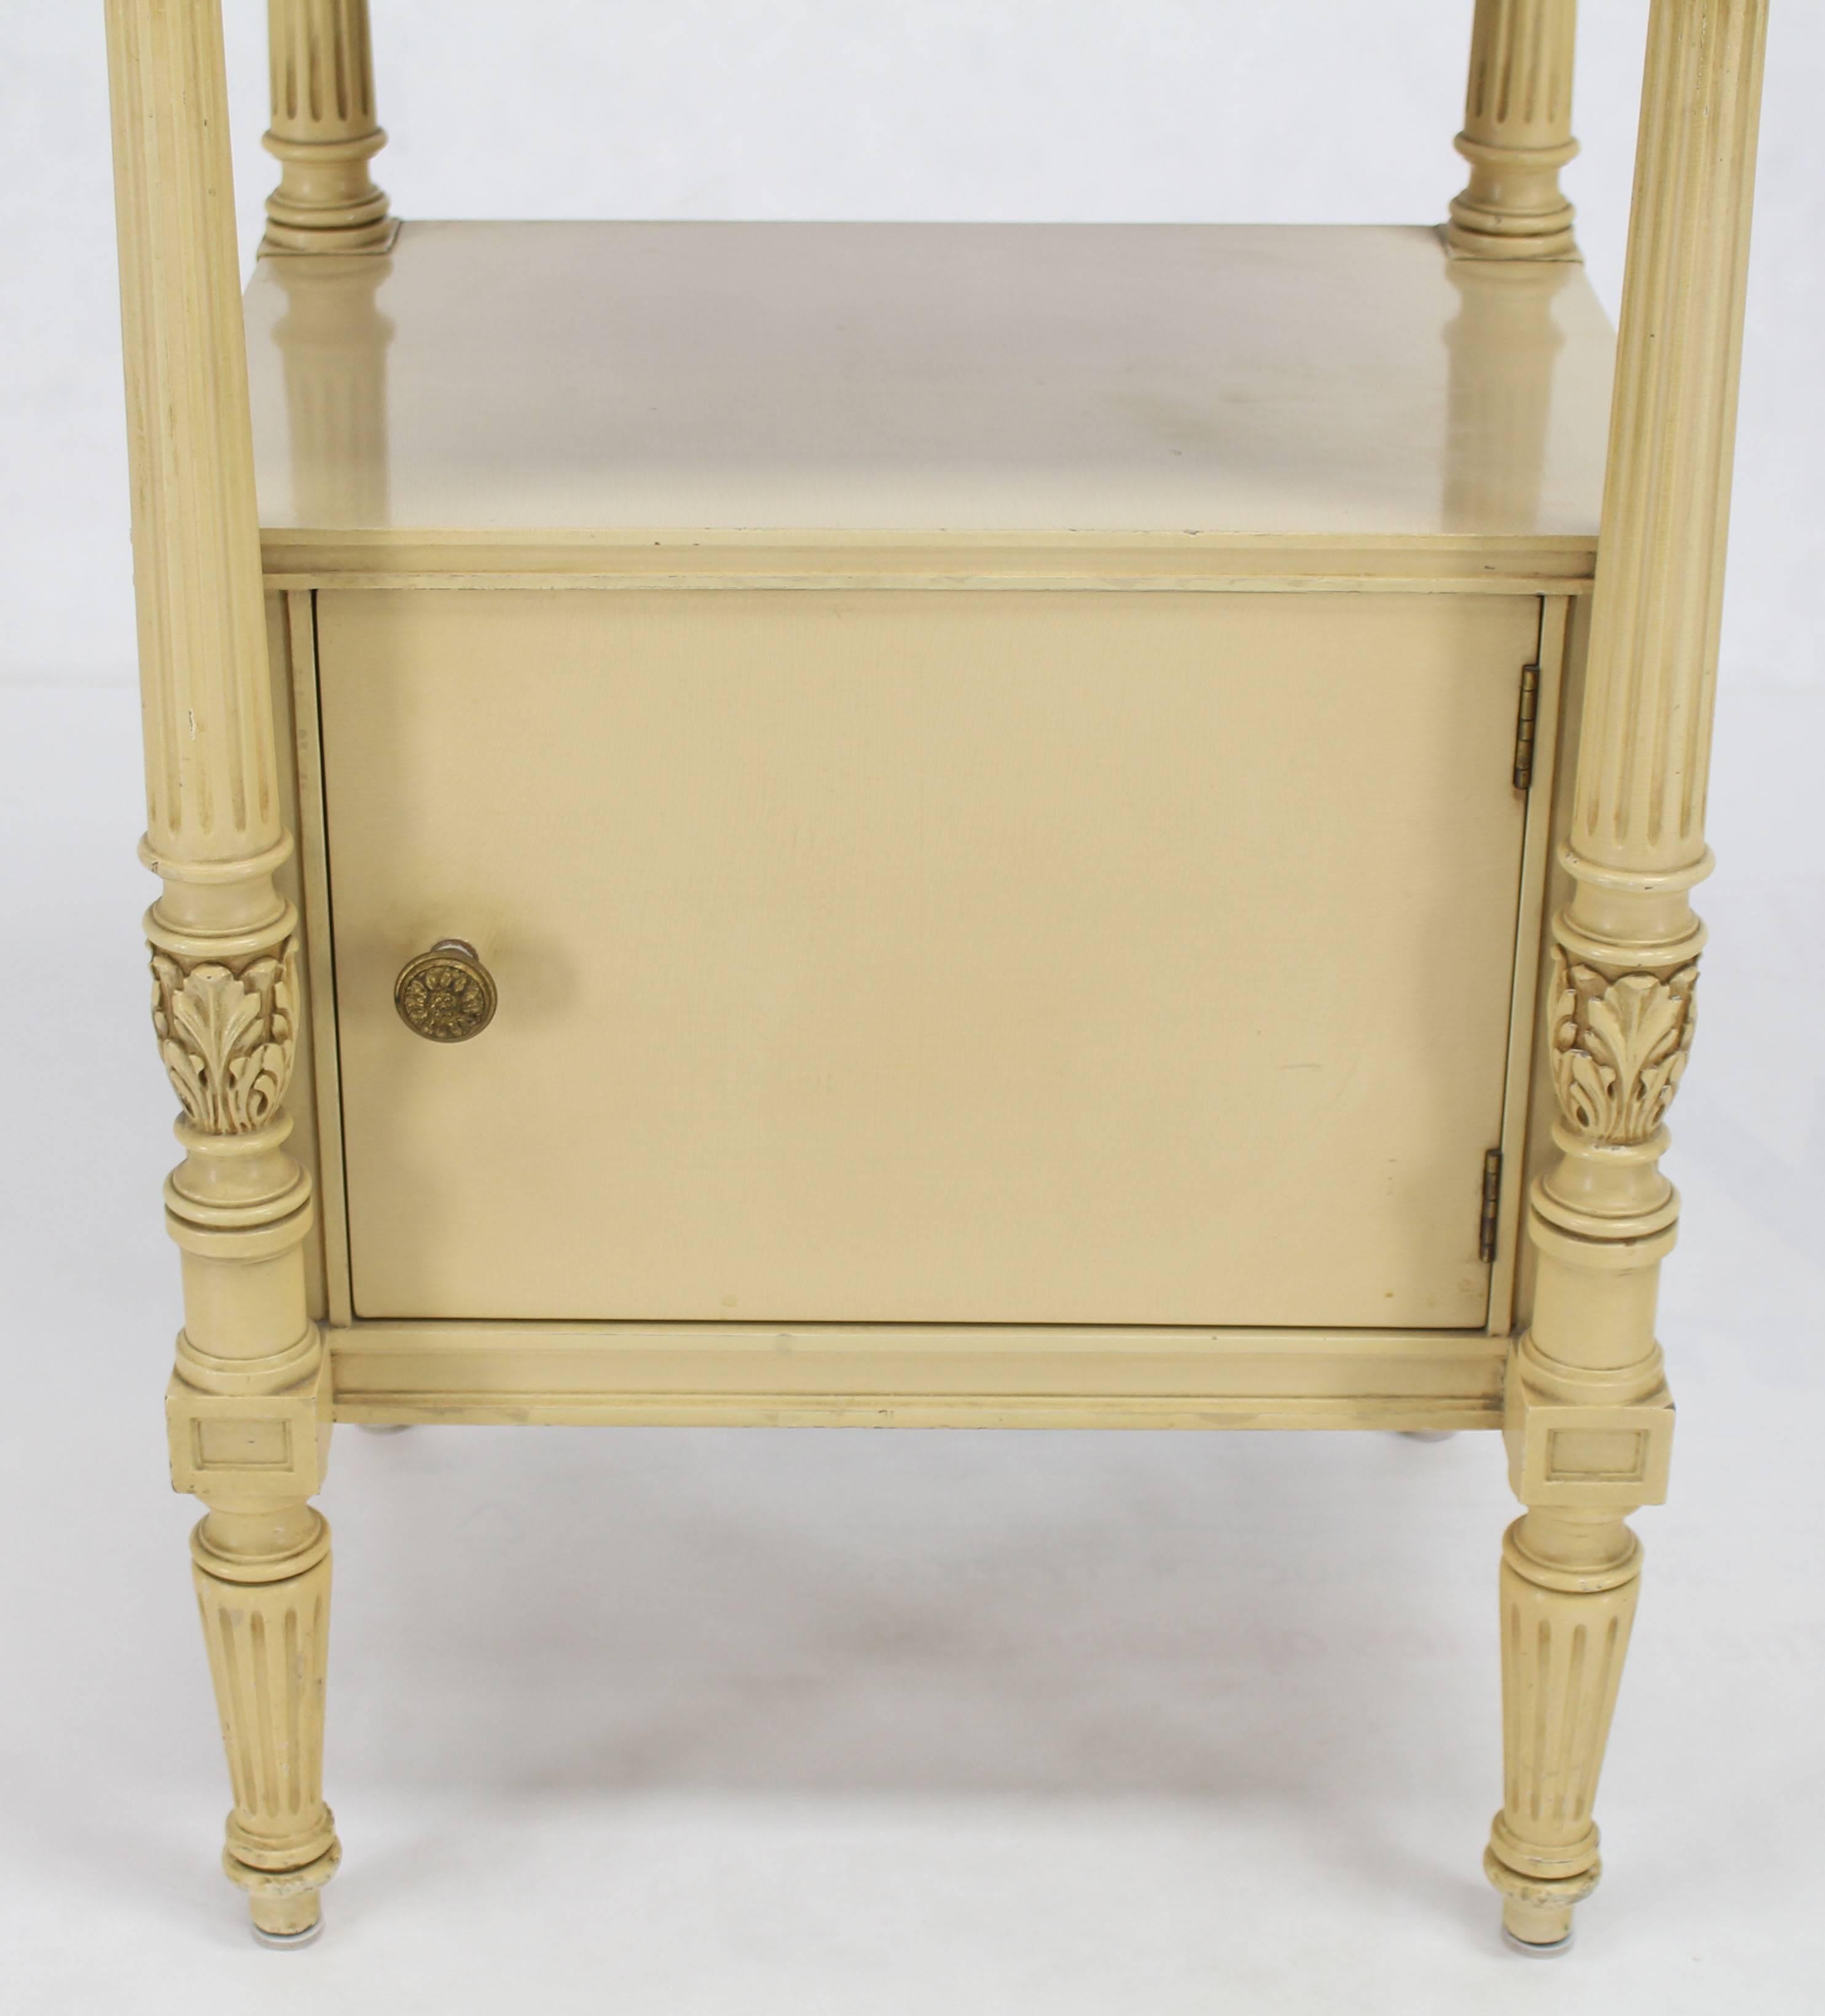 Flint Horner Carved Painted White Stand One Door One Draw Cabinet Stand In Excellent Condition For Sale In Rockaway, NJ